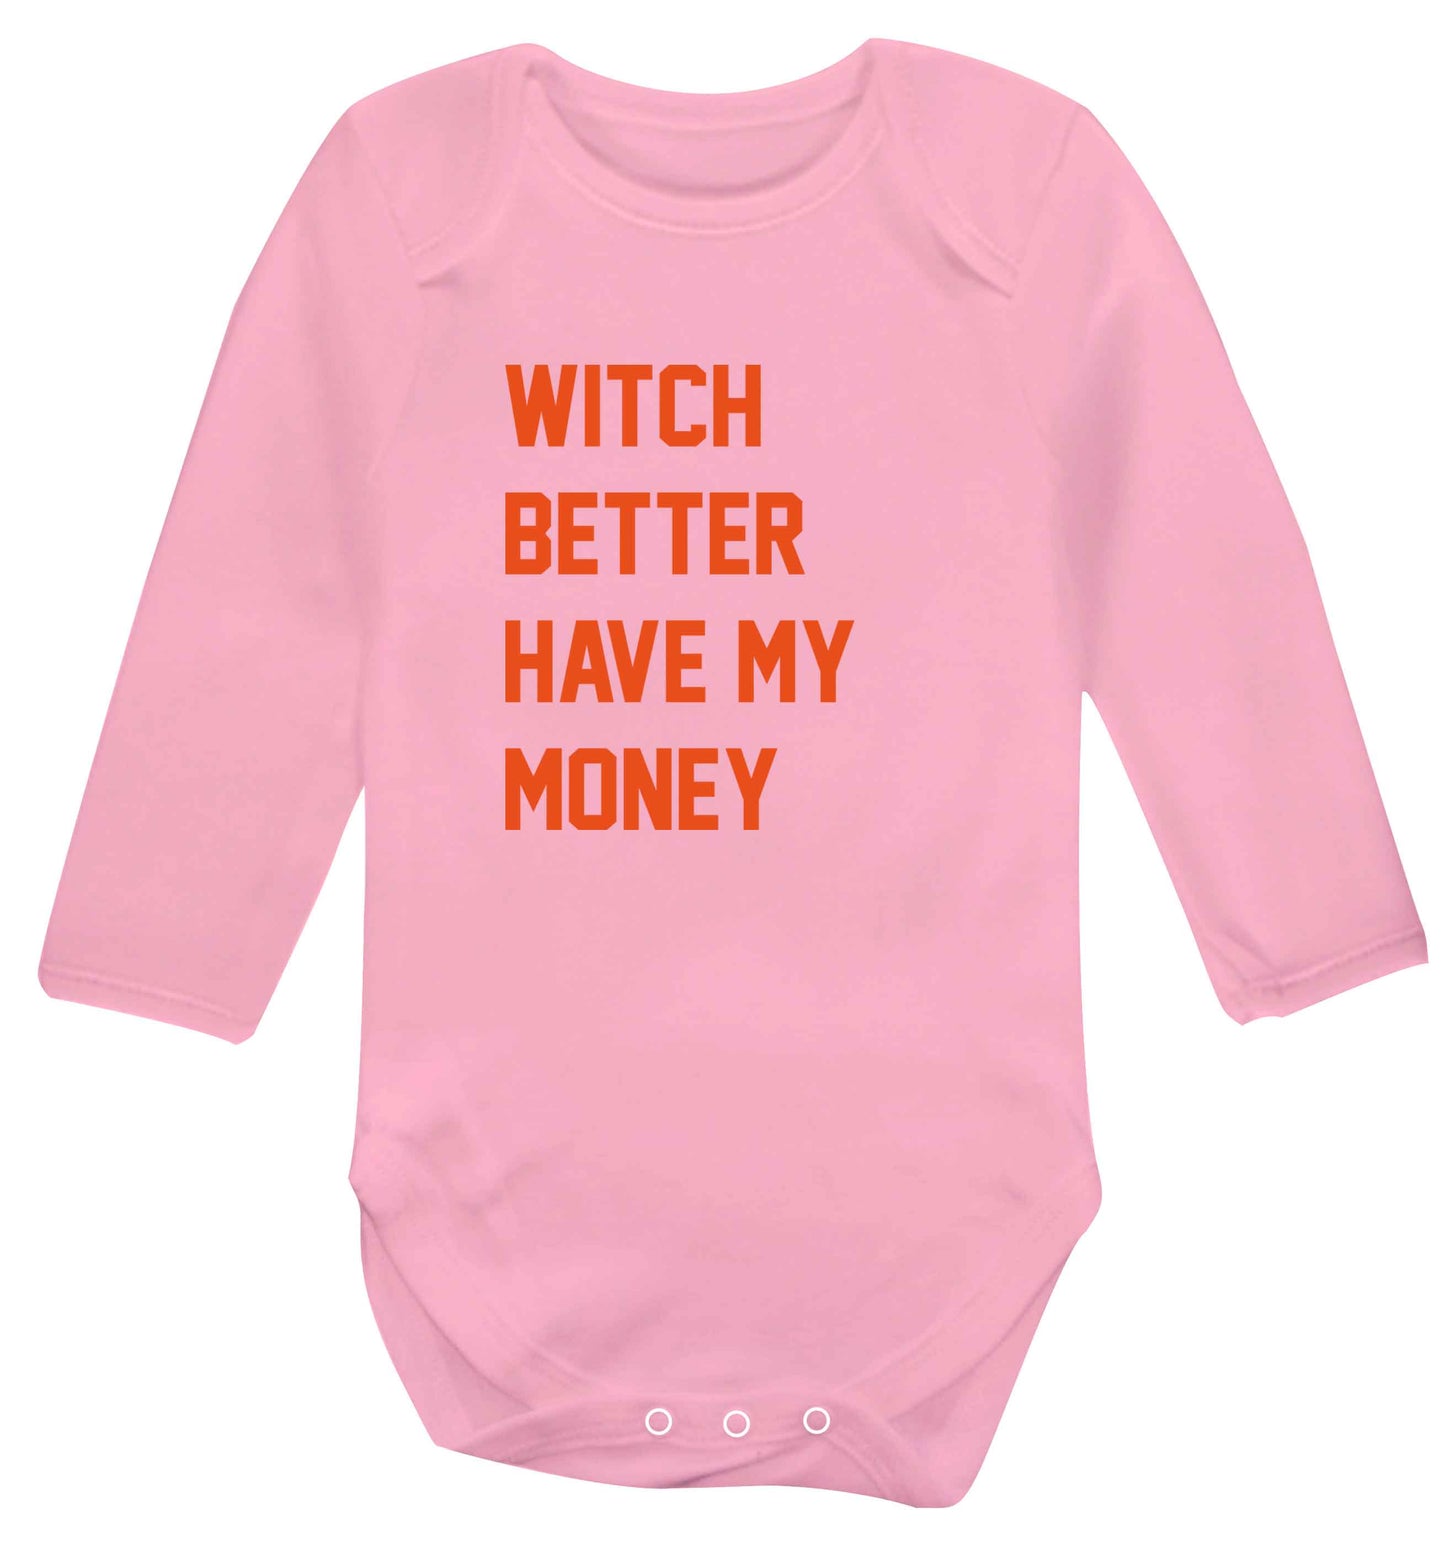 Witch better have my money baby vest long sleeved pale pink 6-12 months